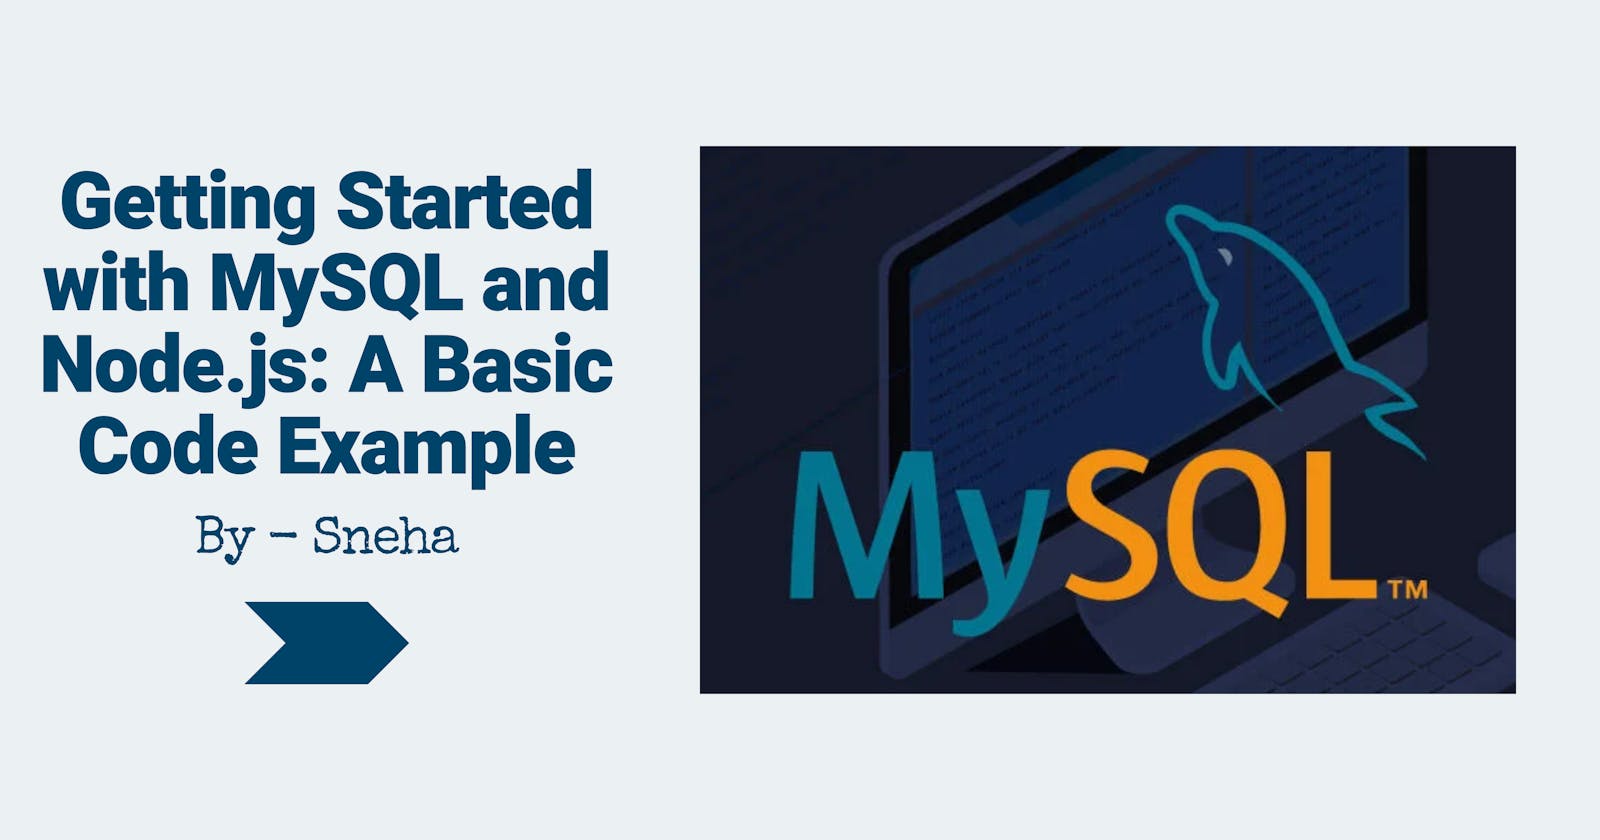 Getting Started with MySQL and Node.js: A Basic Code Example